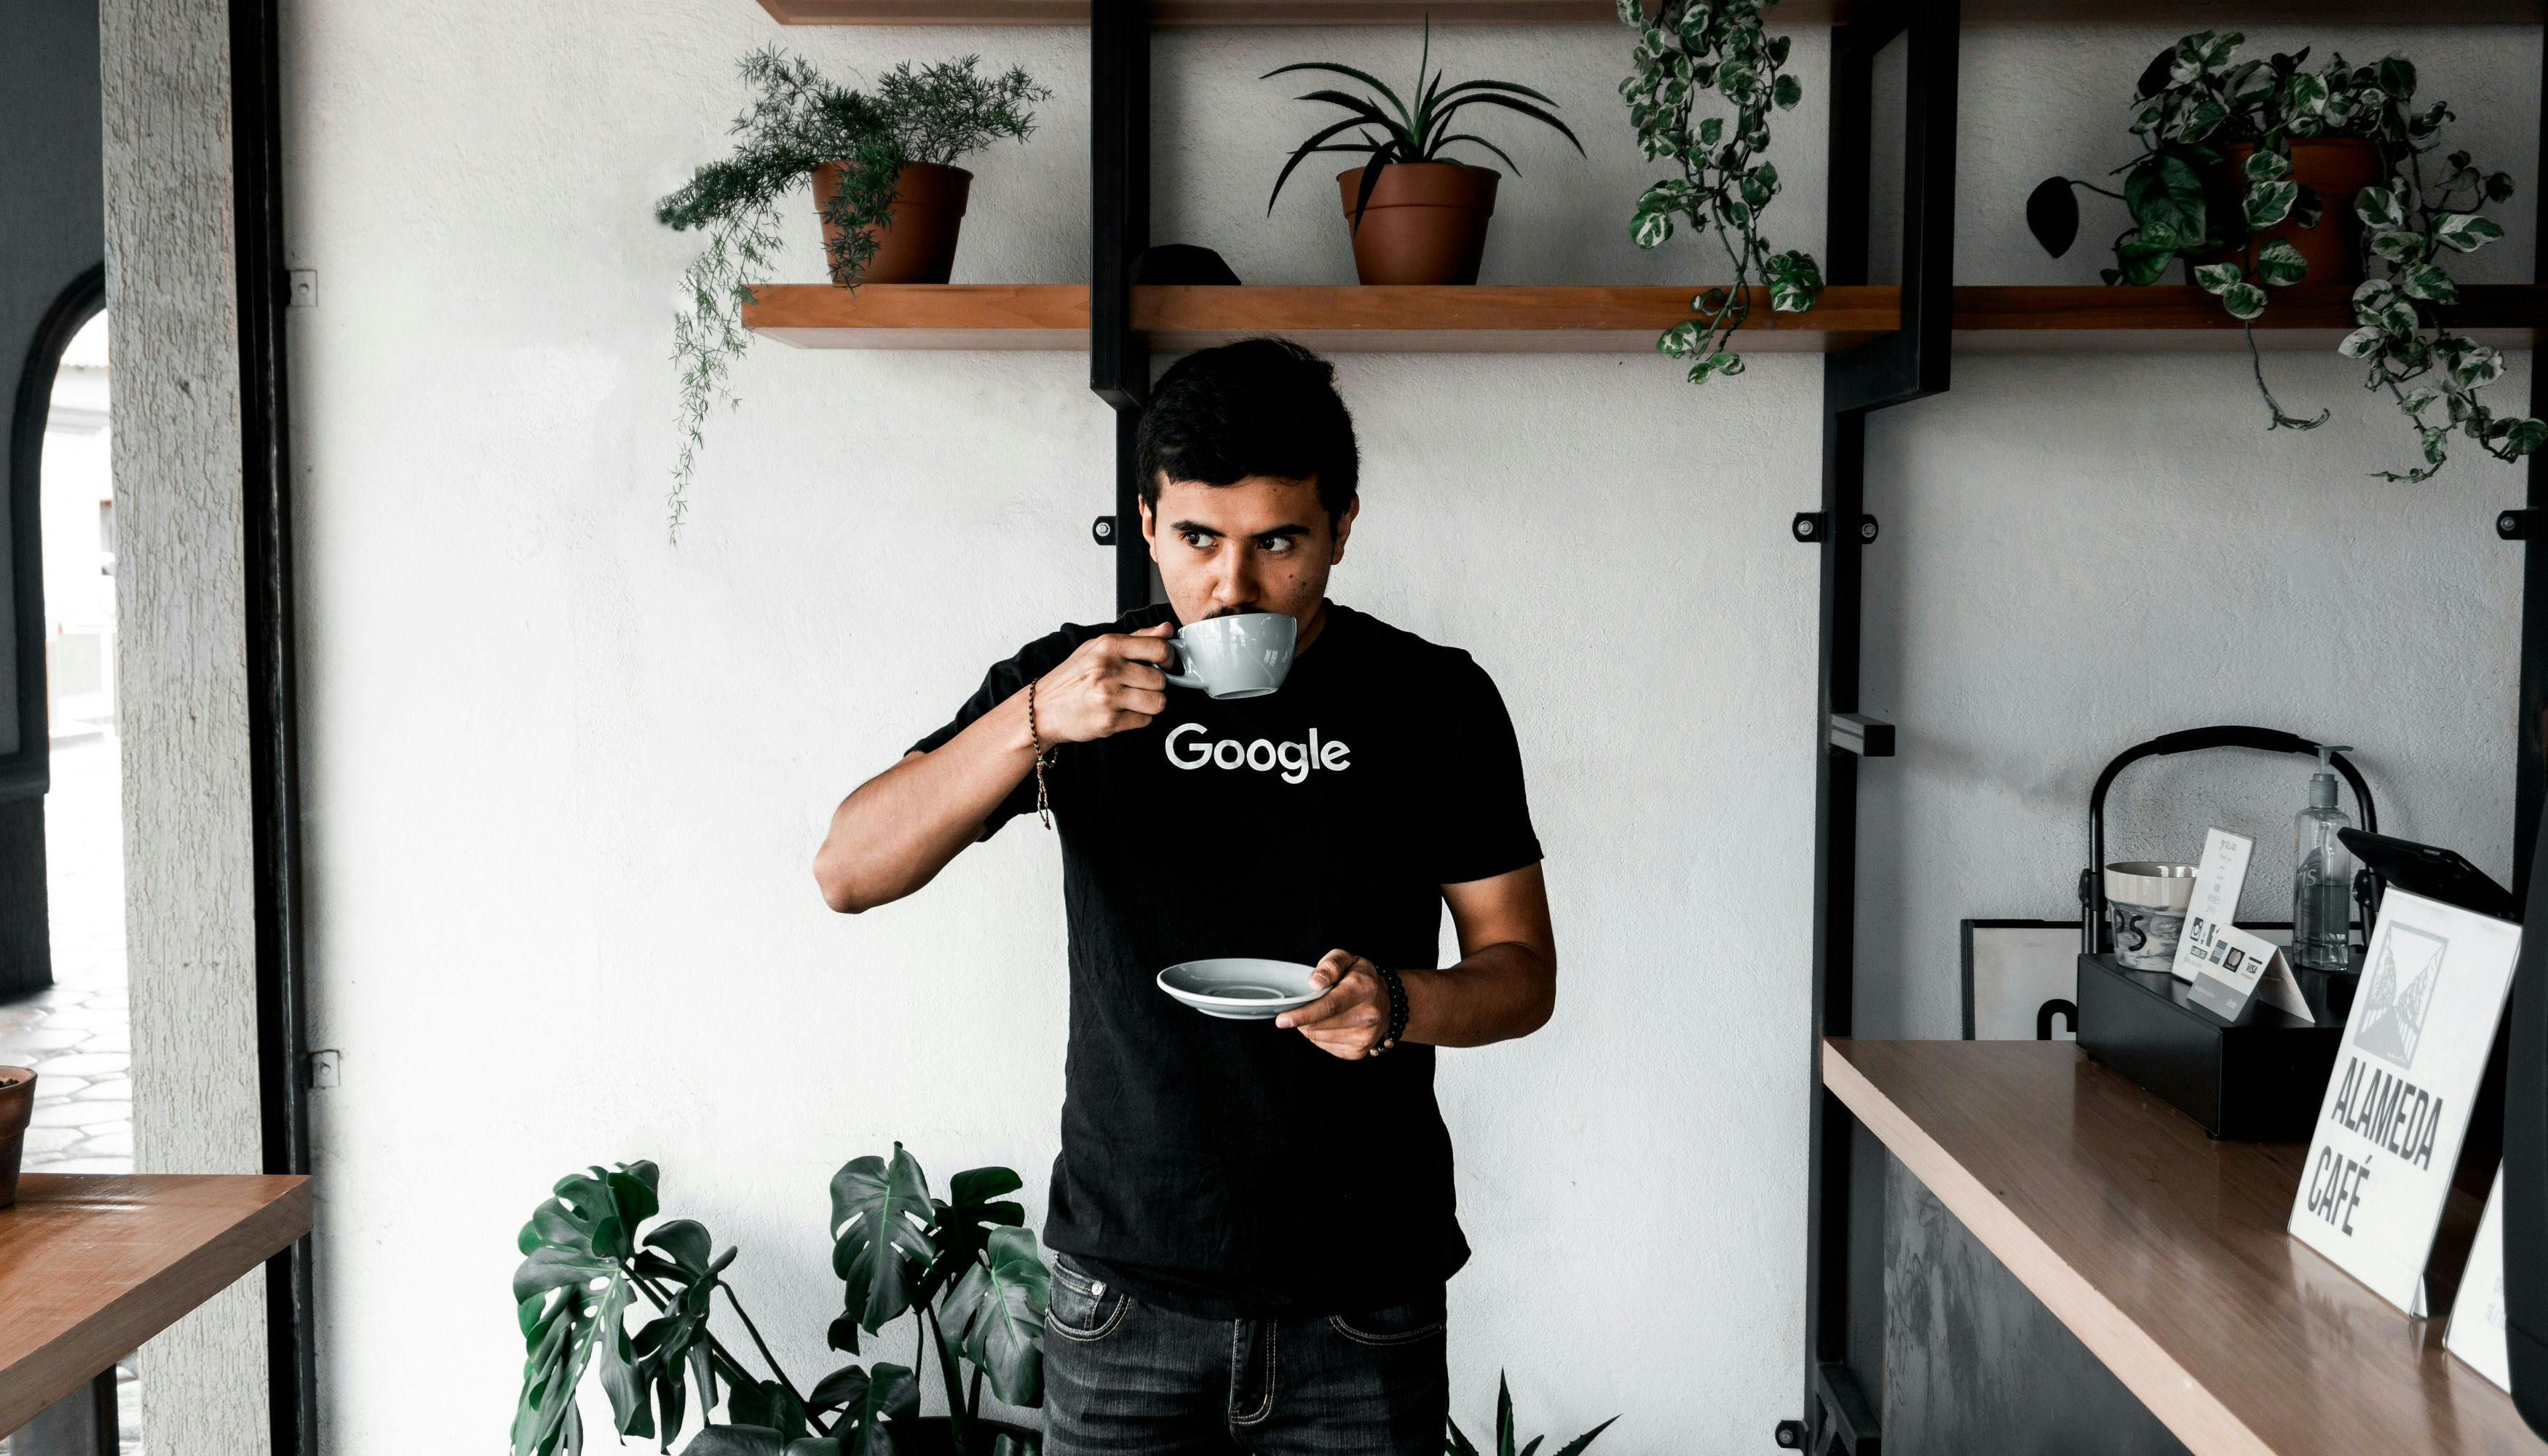 Man drinking coffee in a Google t-shirt